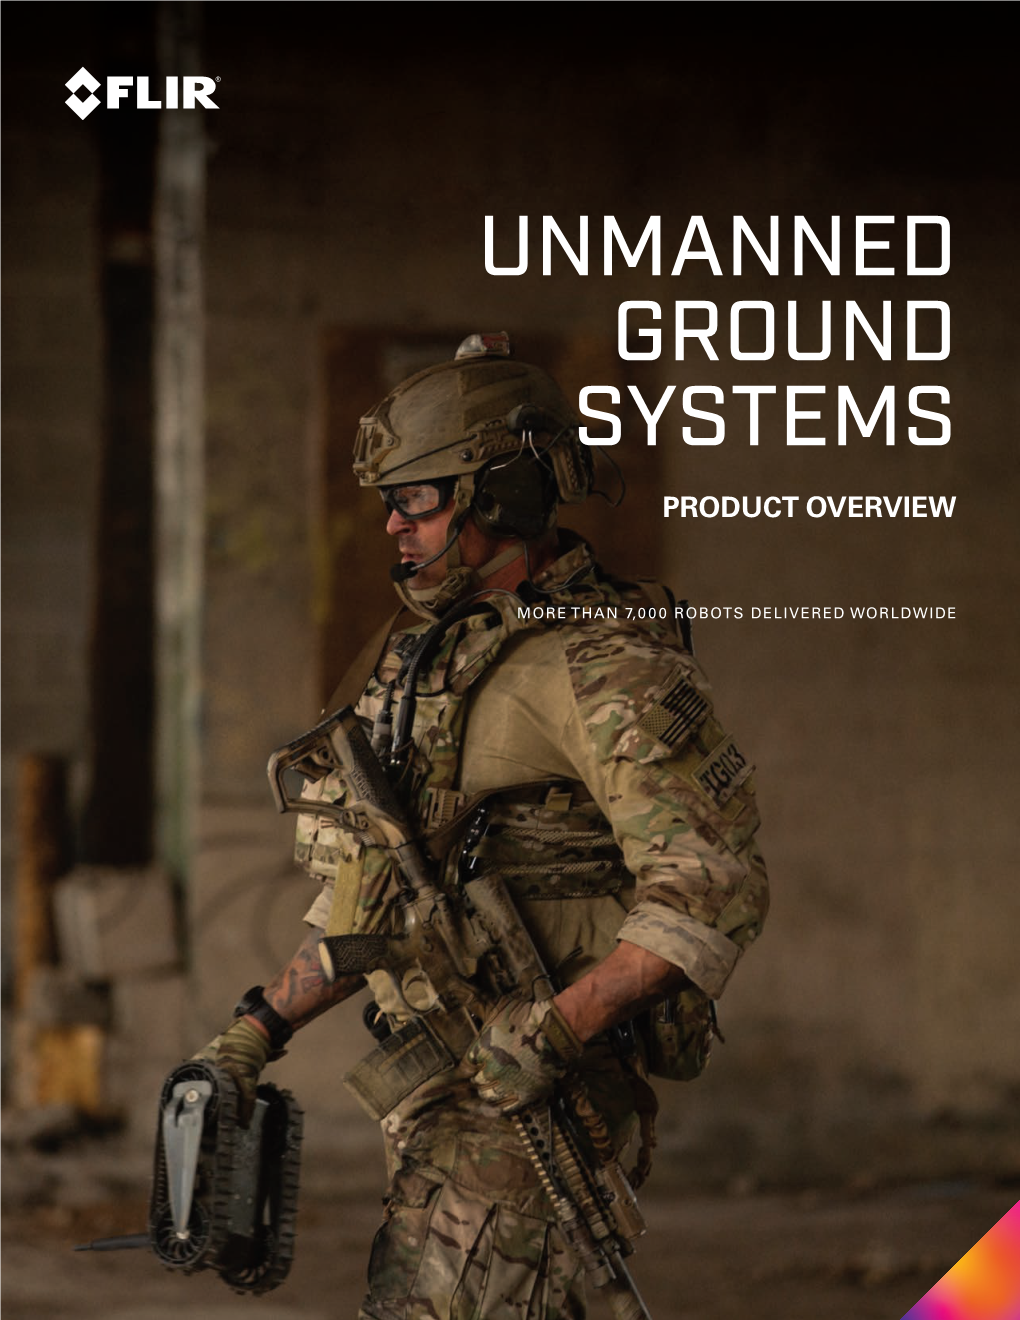 Unmanned Ground Systems Product Overview